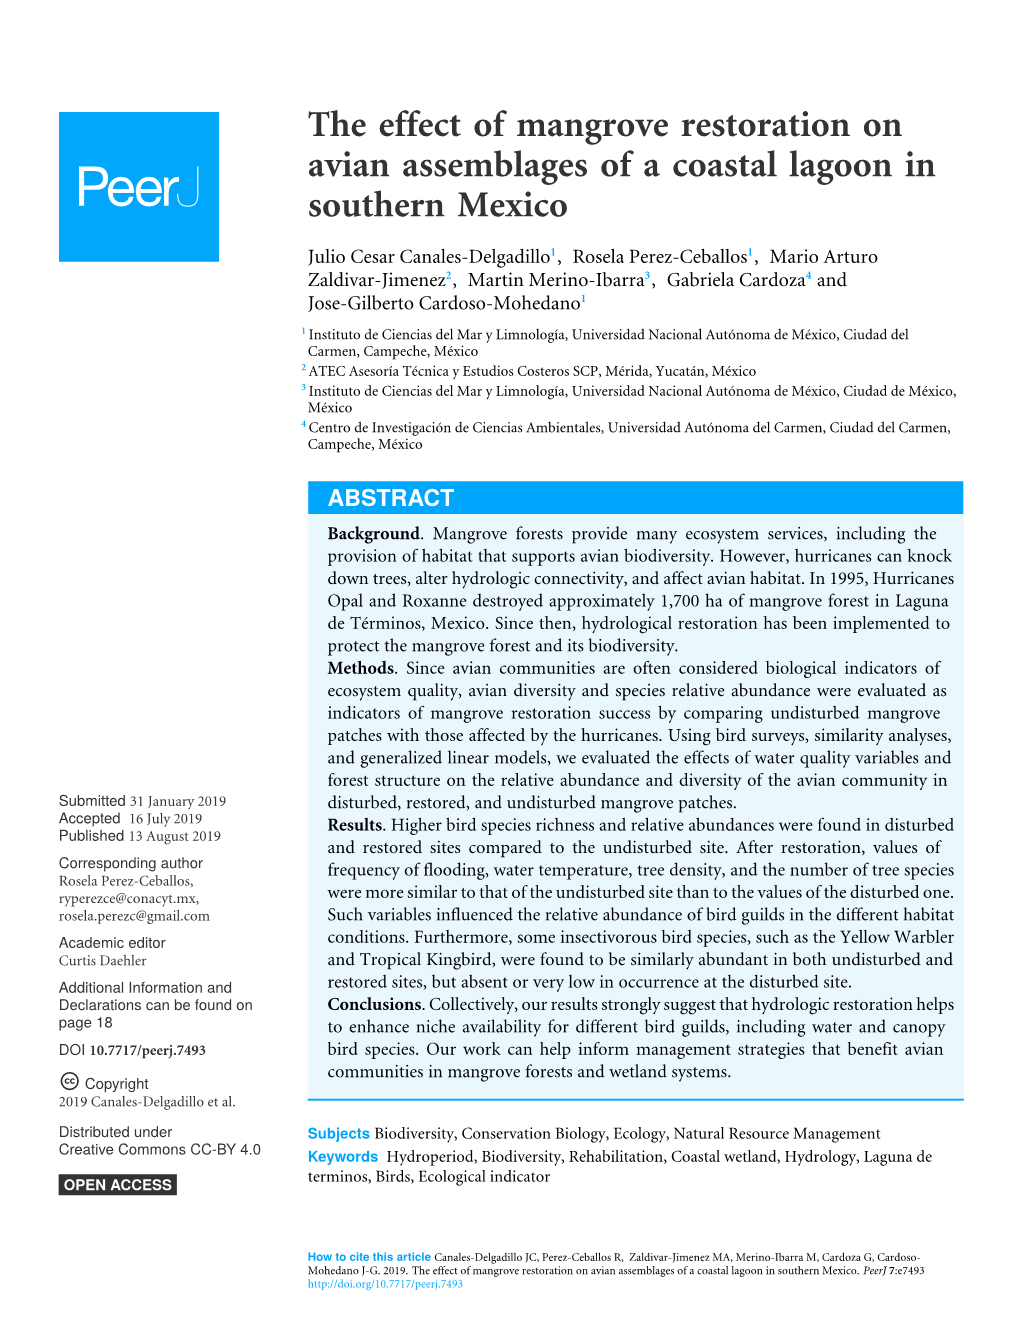 The Effect of Mangrove Restoration on Avian Assemblages of a Coastal Lagoon in Southern Mexico